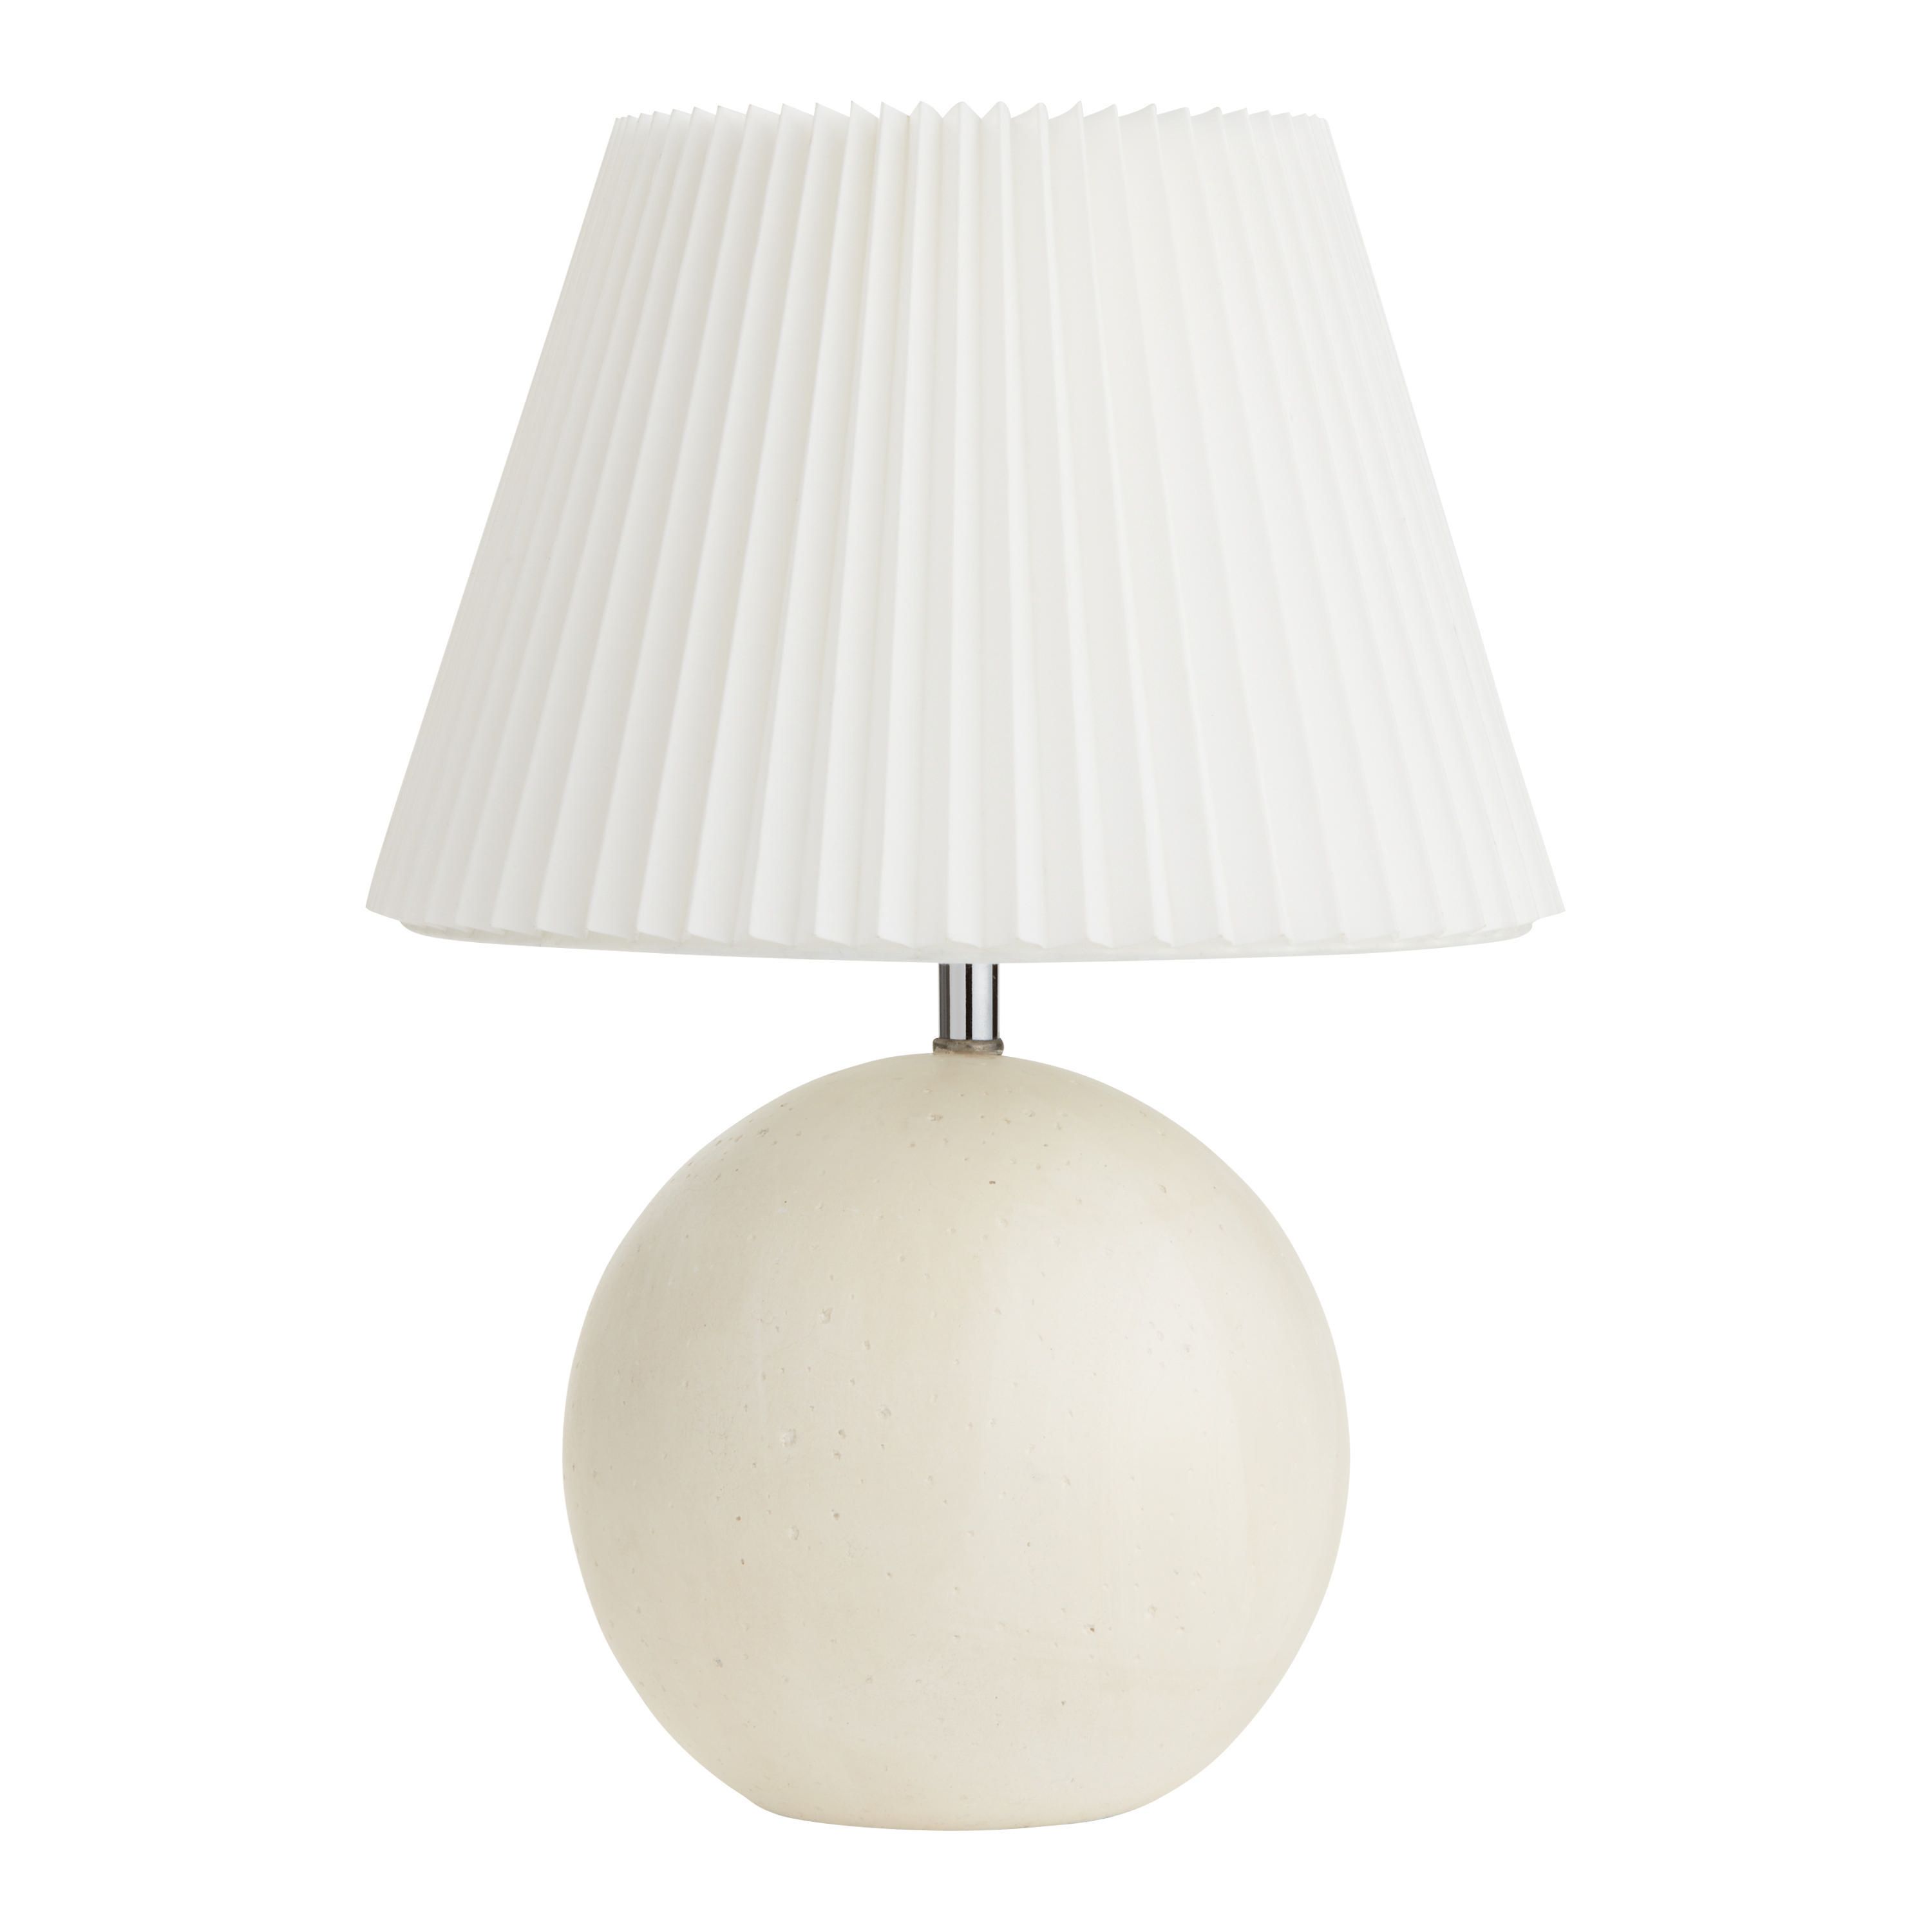 Round White Stone Table Lamp with Pleated Shade | World Market